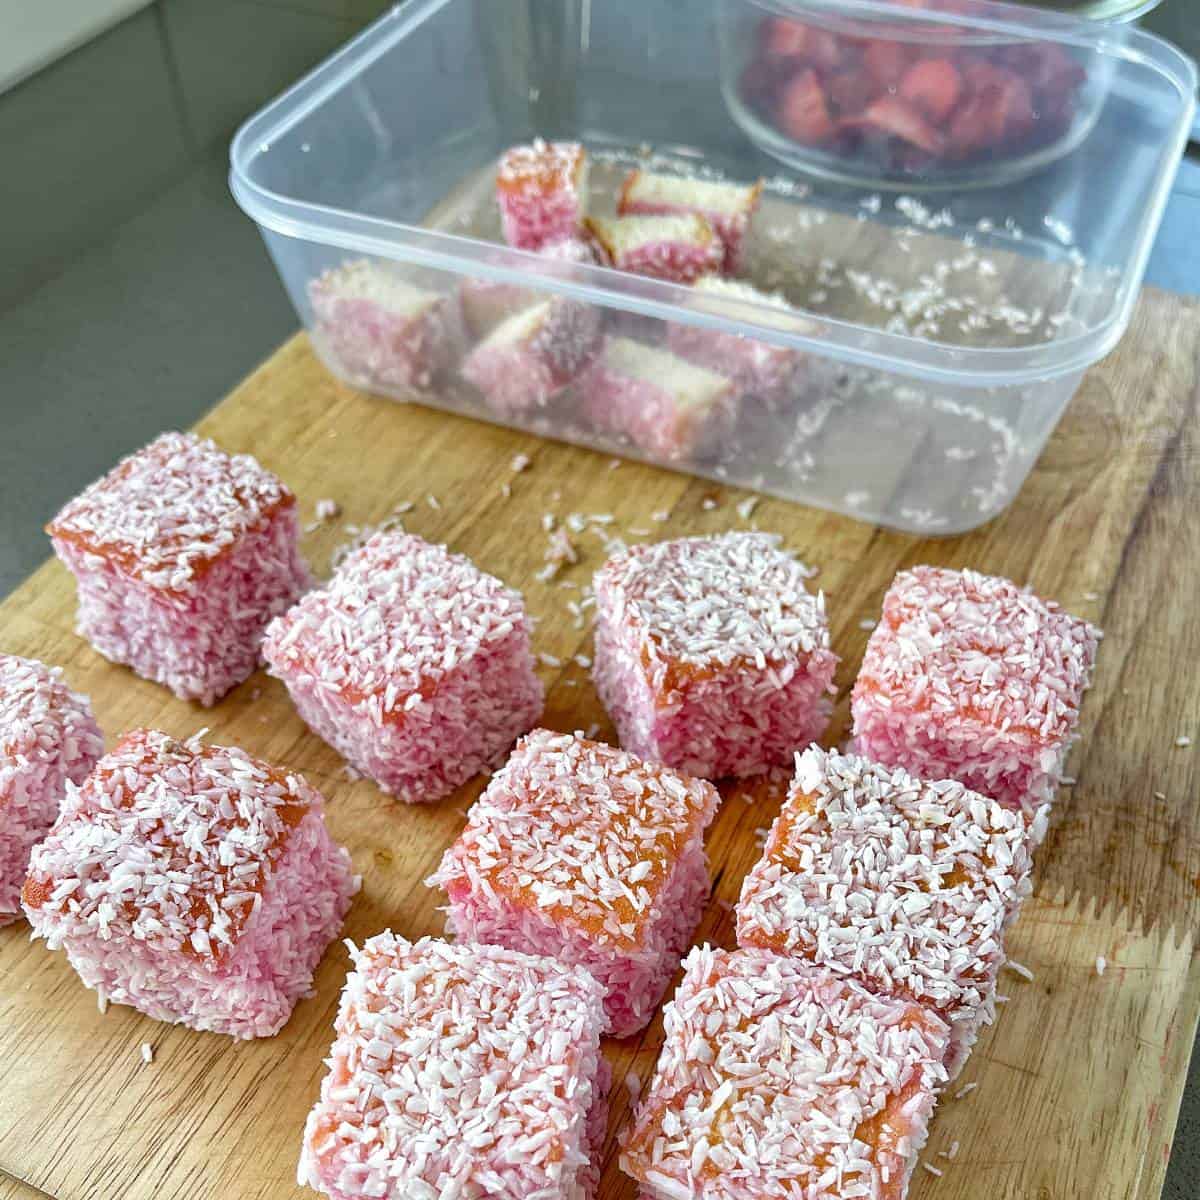 Strawberry lamingtons on a wooden chopping board. Slices lamingtons in a plastic container to the side.